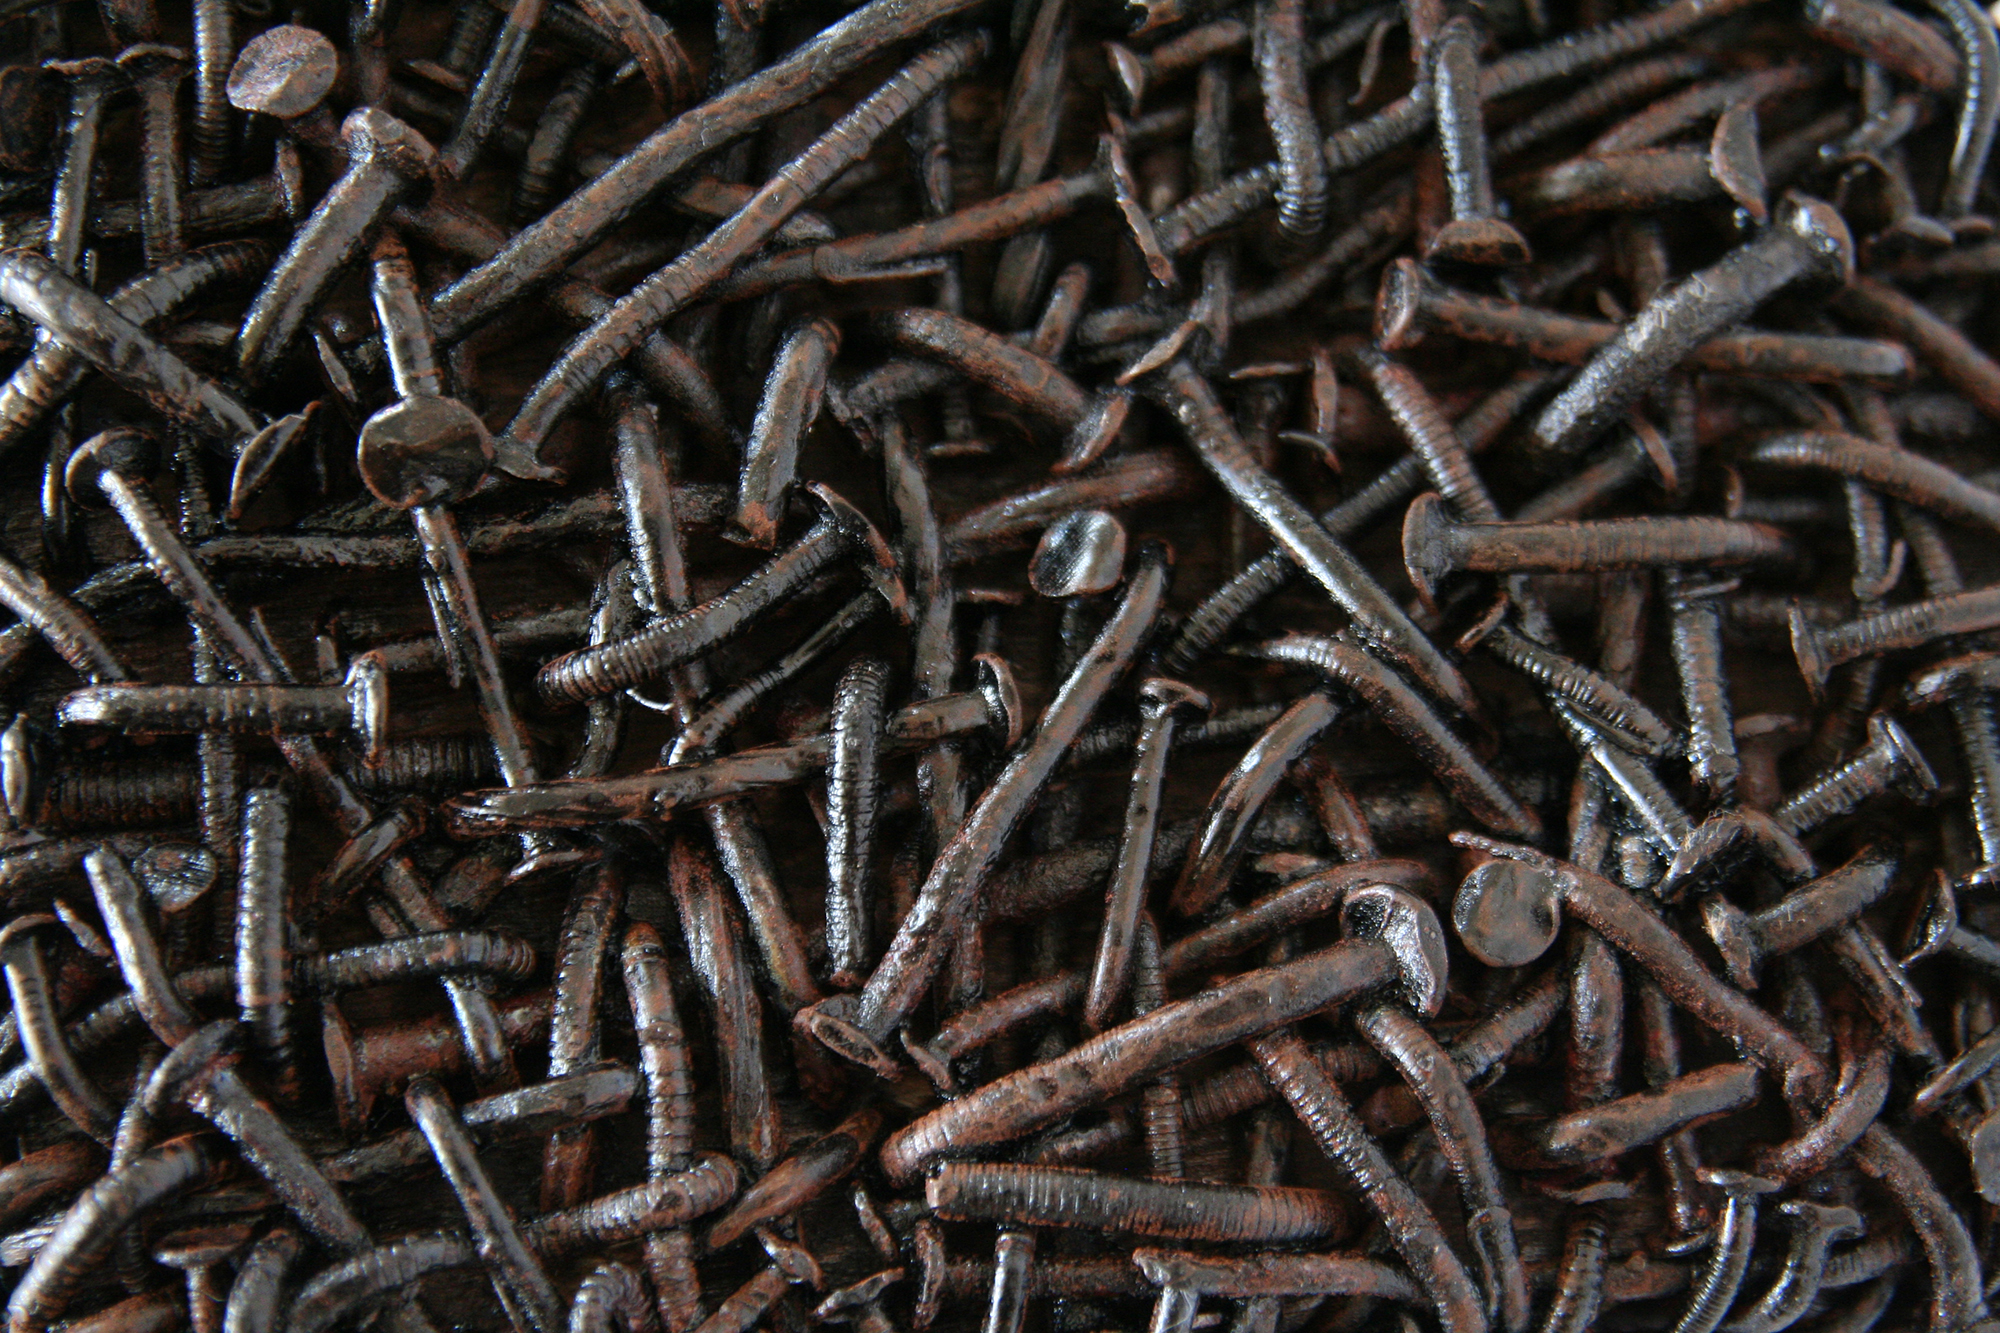 Skein of rusted nails made of nails, wood -